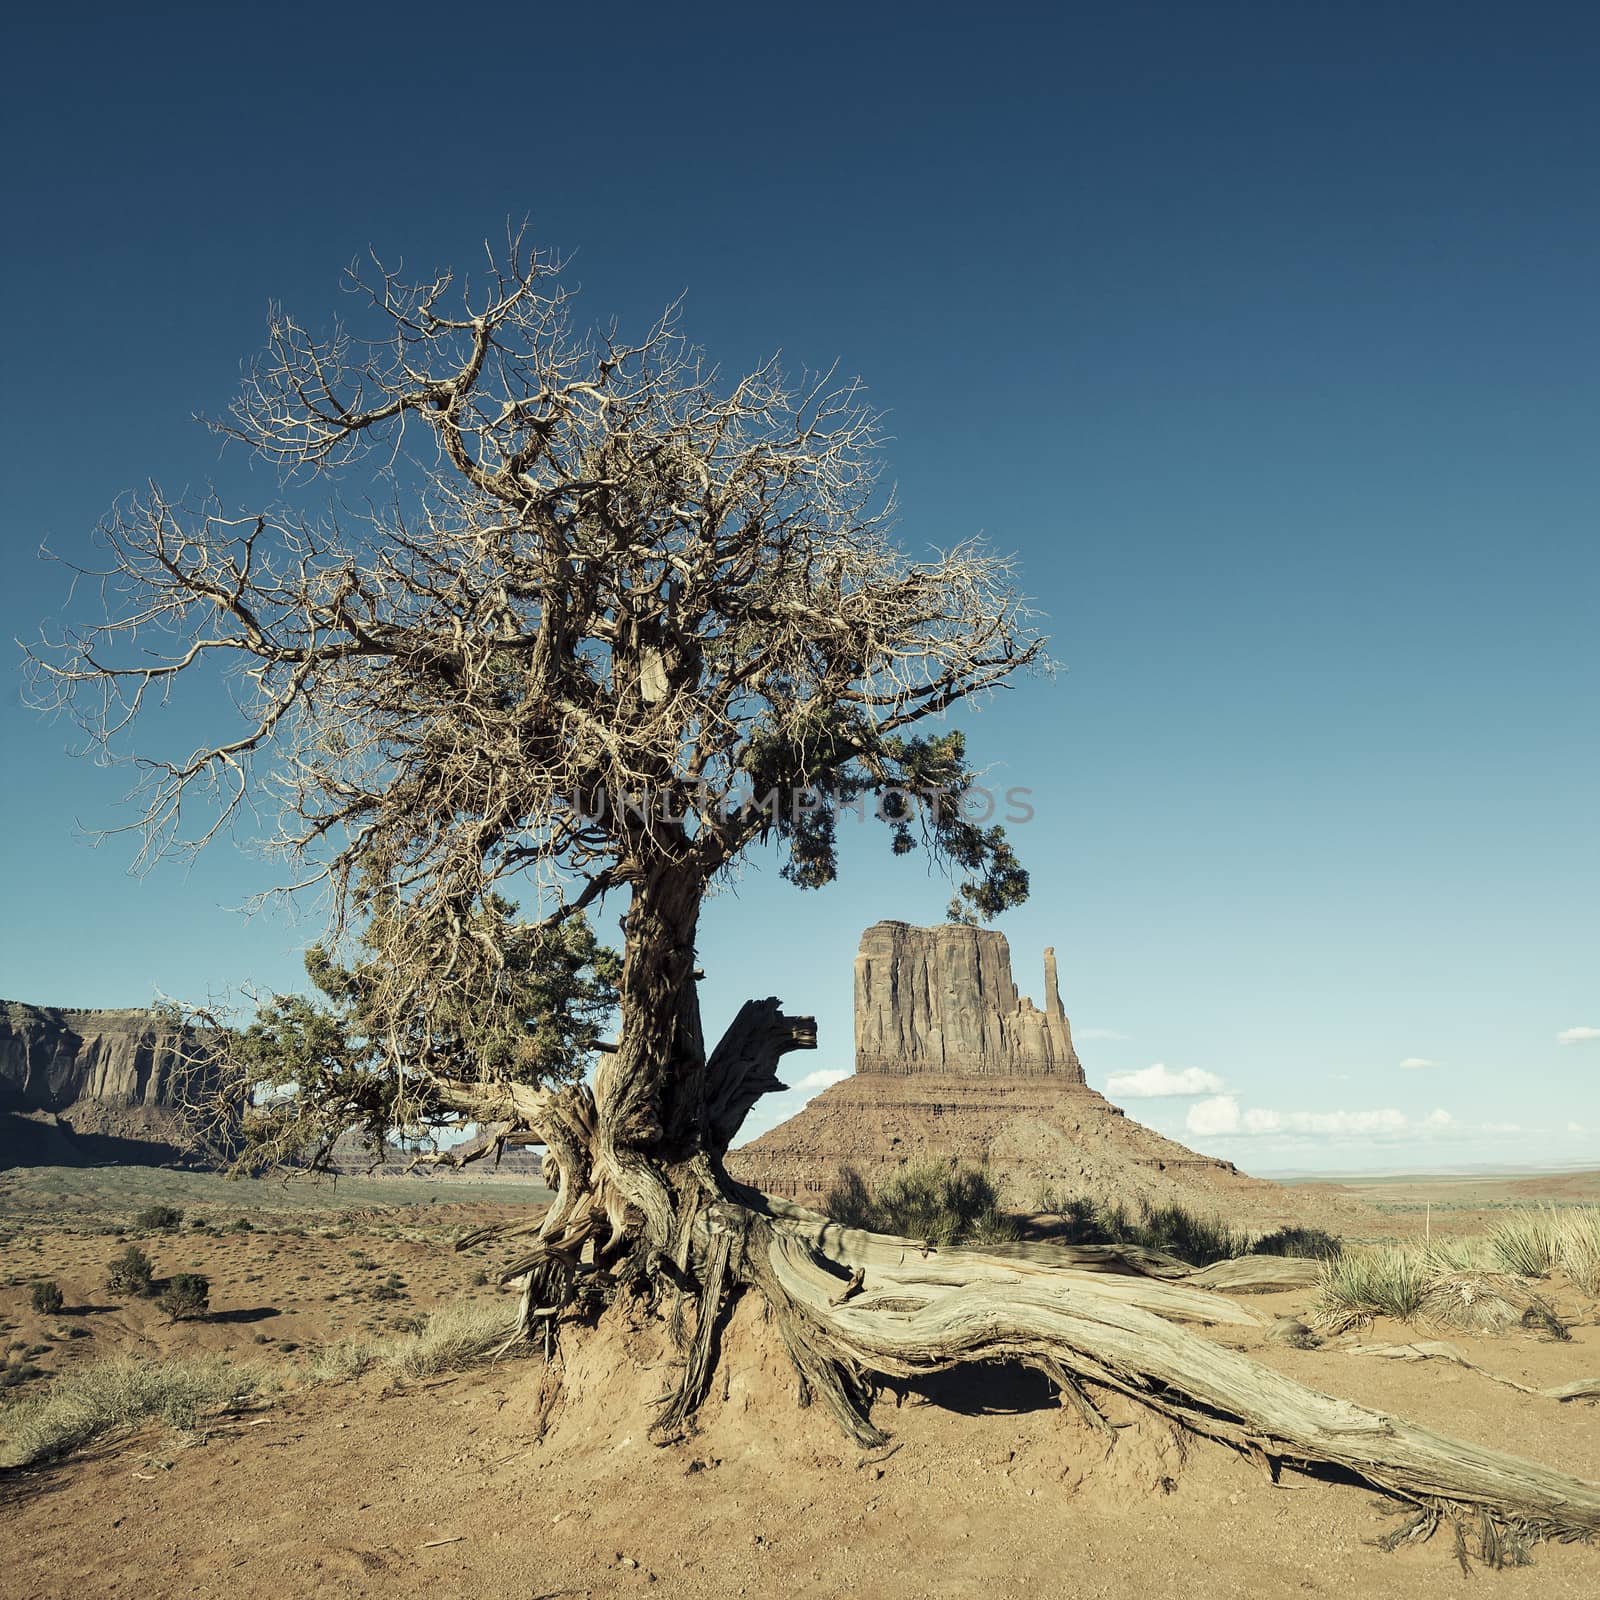 Monument Valley and tree with special photographic processing by vwalakte